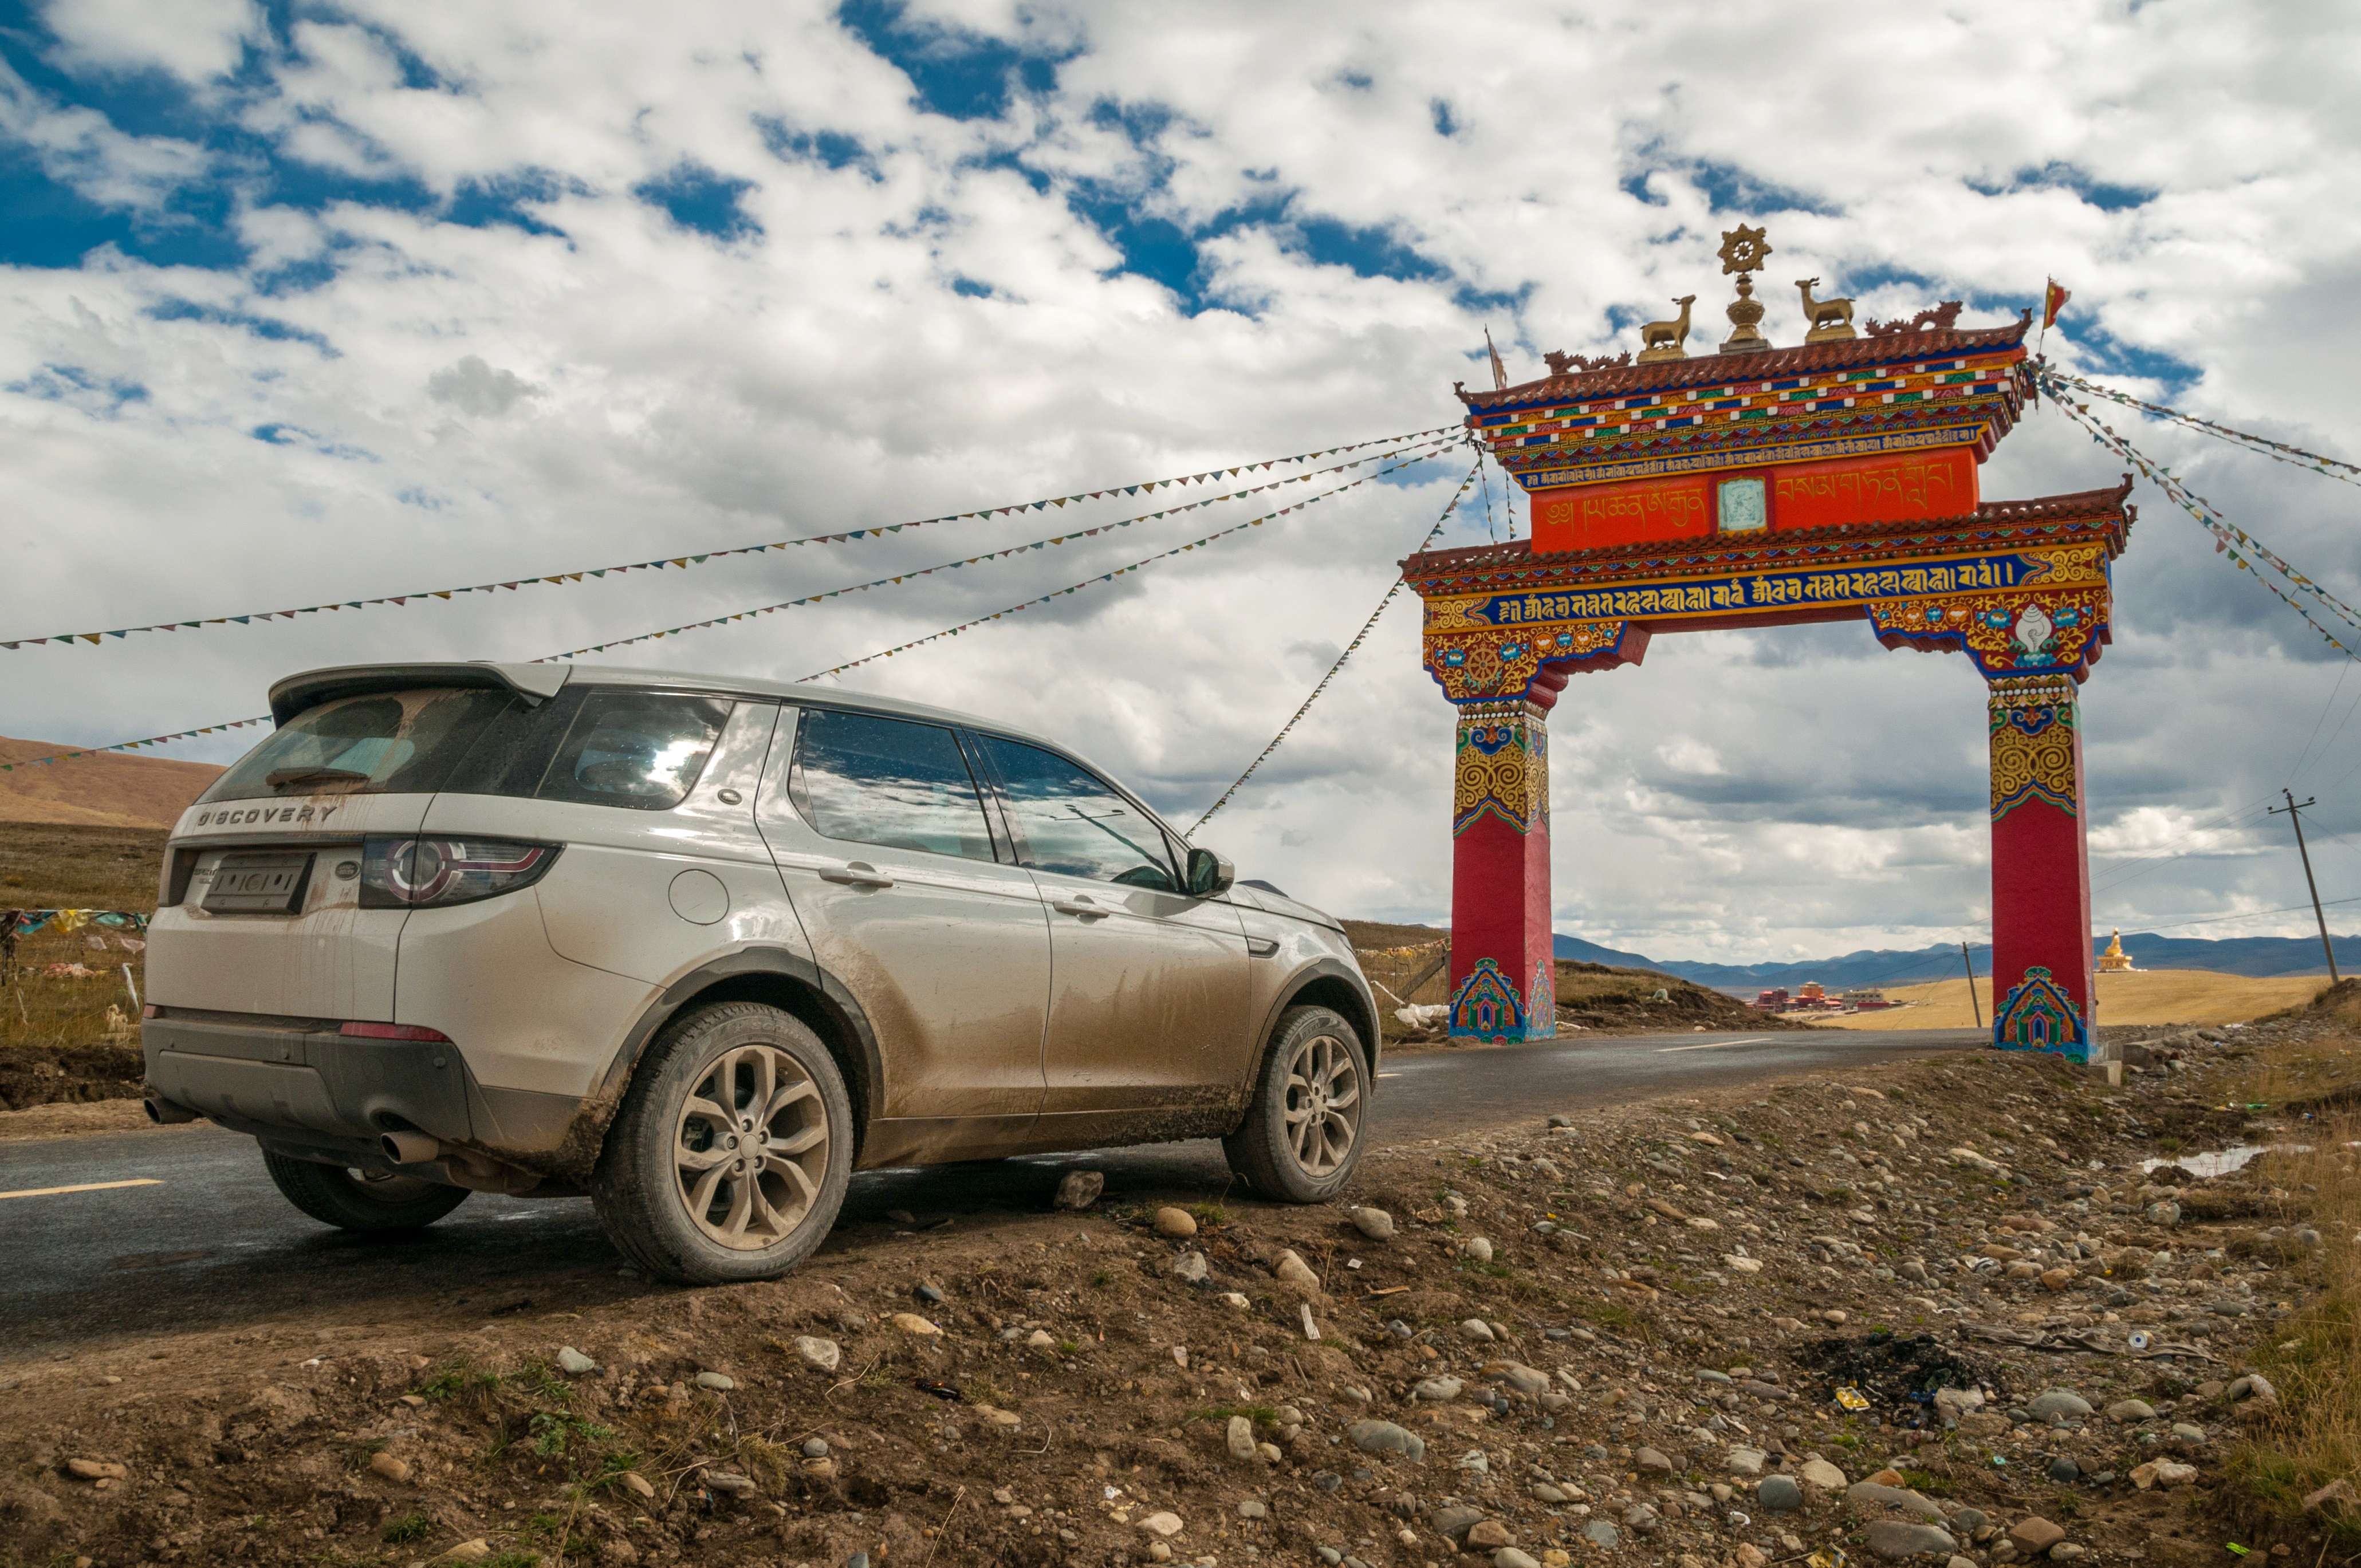 Driving the Land Rover Discovery Sport in Sichuan, the car has good road holding, though the drivetrain can be problematic. Photos: Mark Andrews